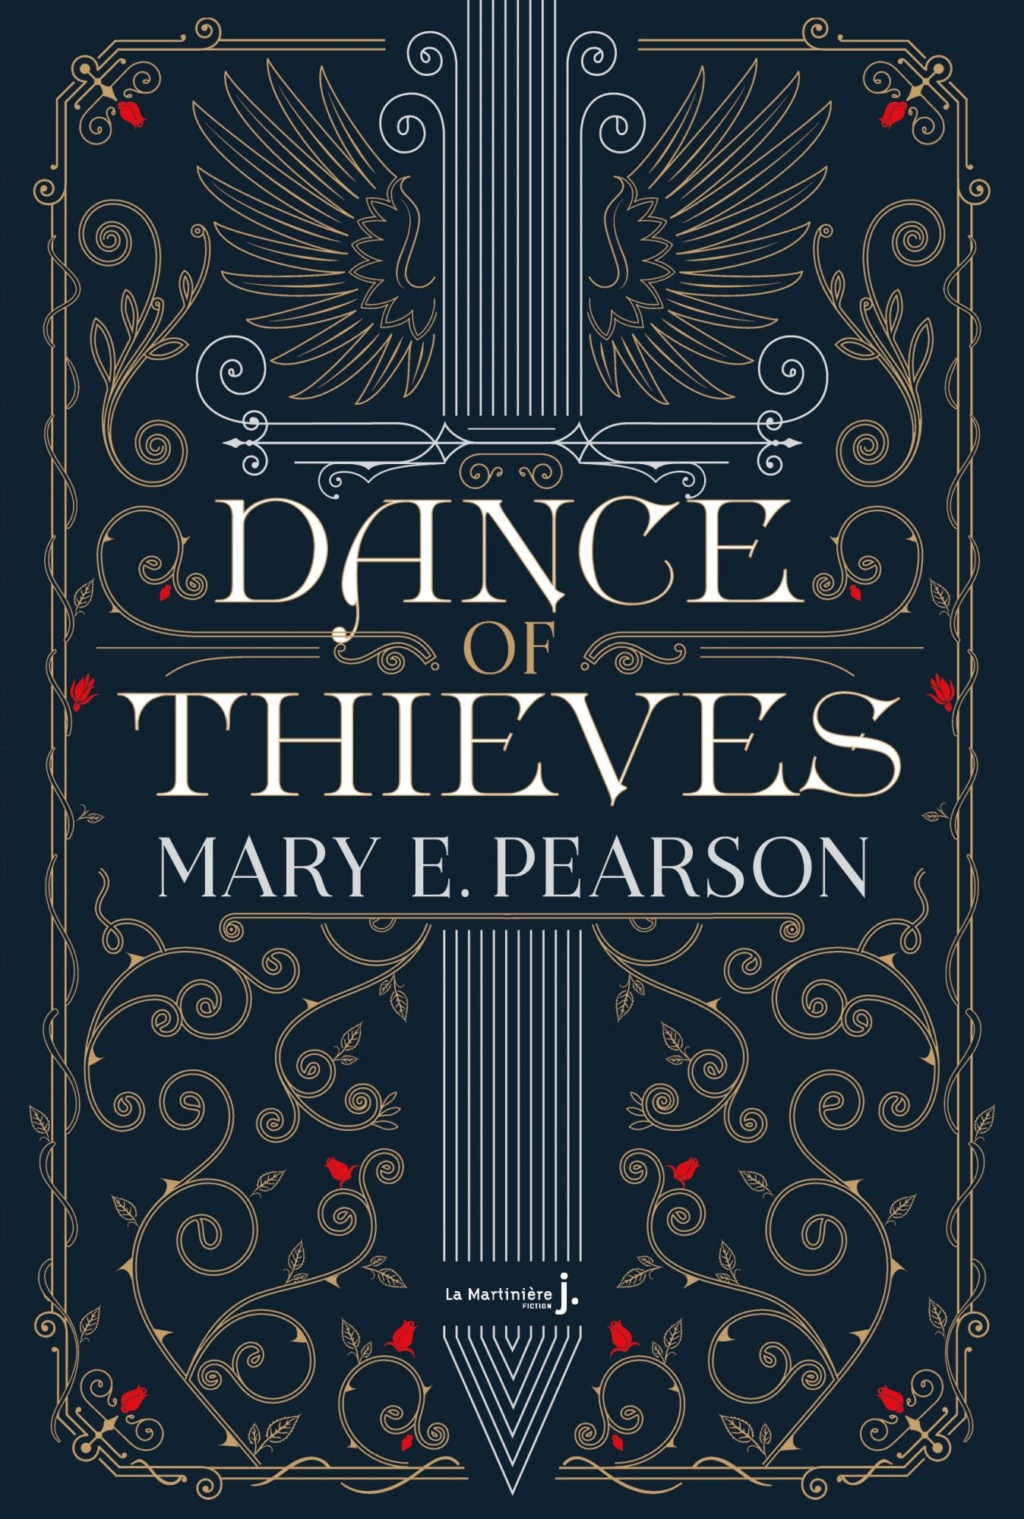 Dance of Thieves - Tome 1 : Dance of Thieves de Mary E. Pearson Dance-10